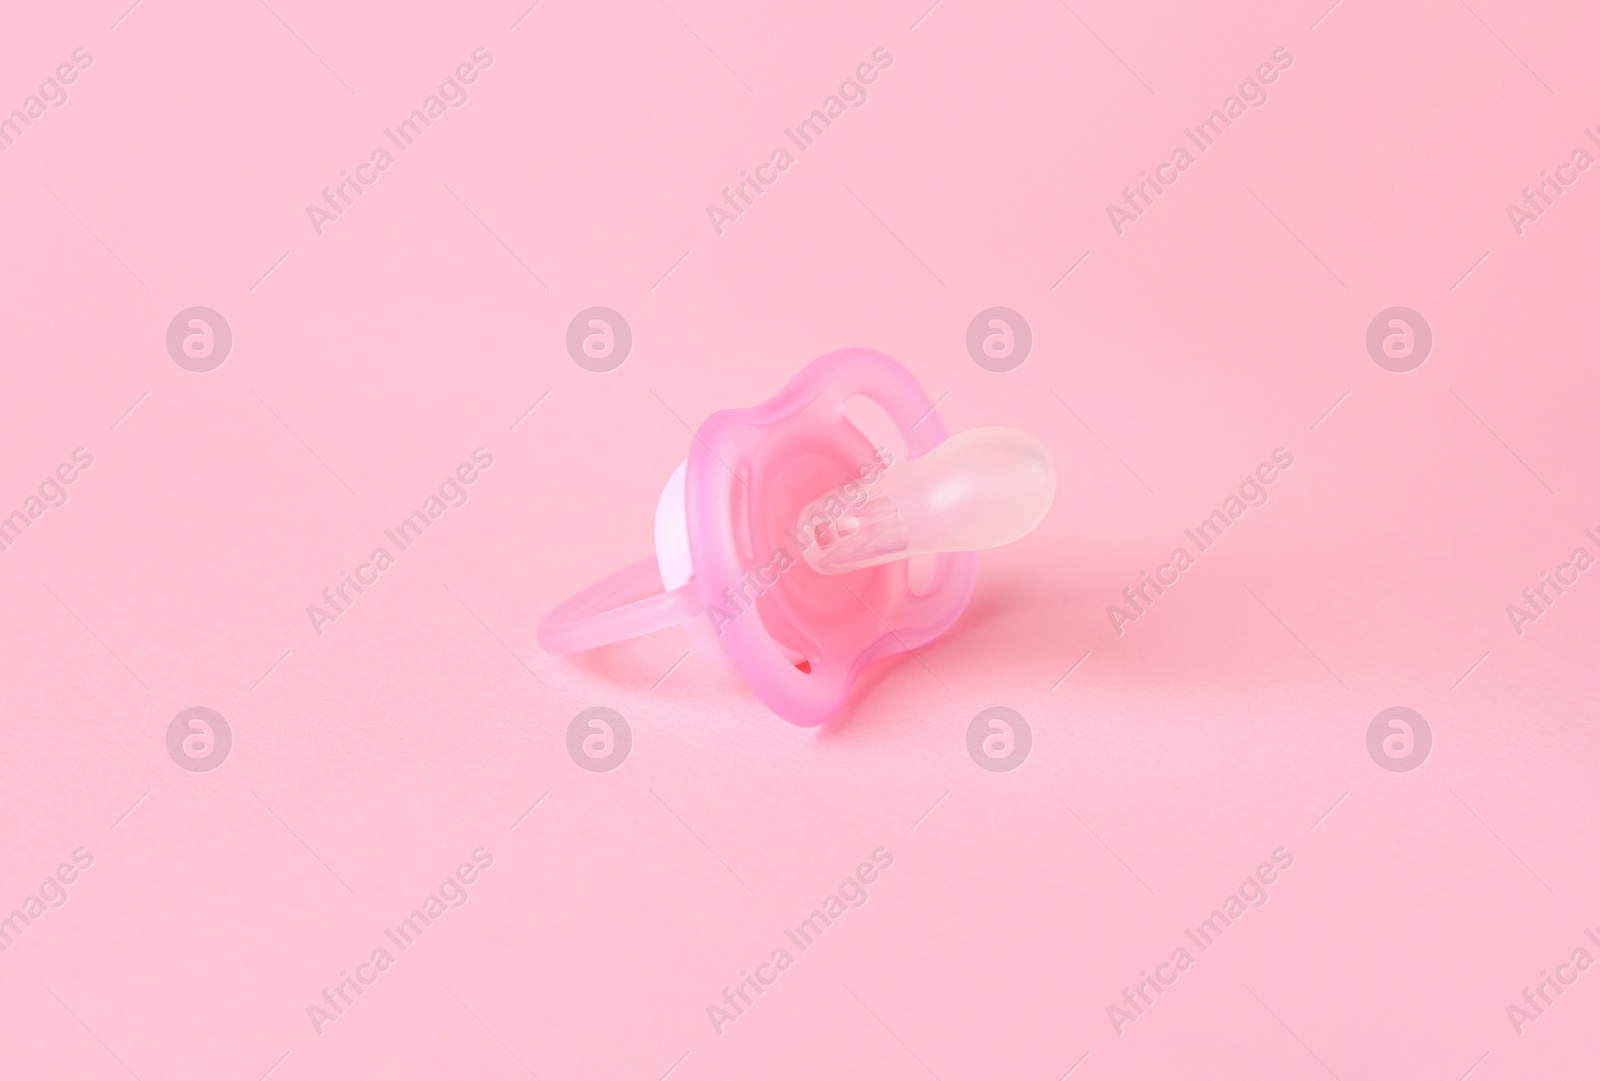 Photo of One new baby pacifier on pink background